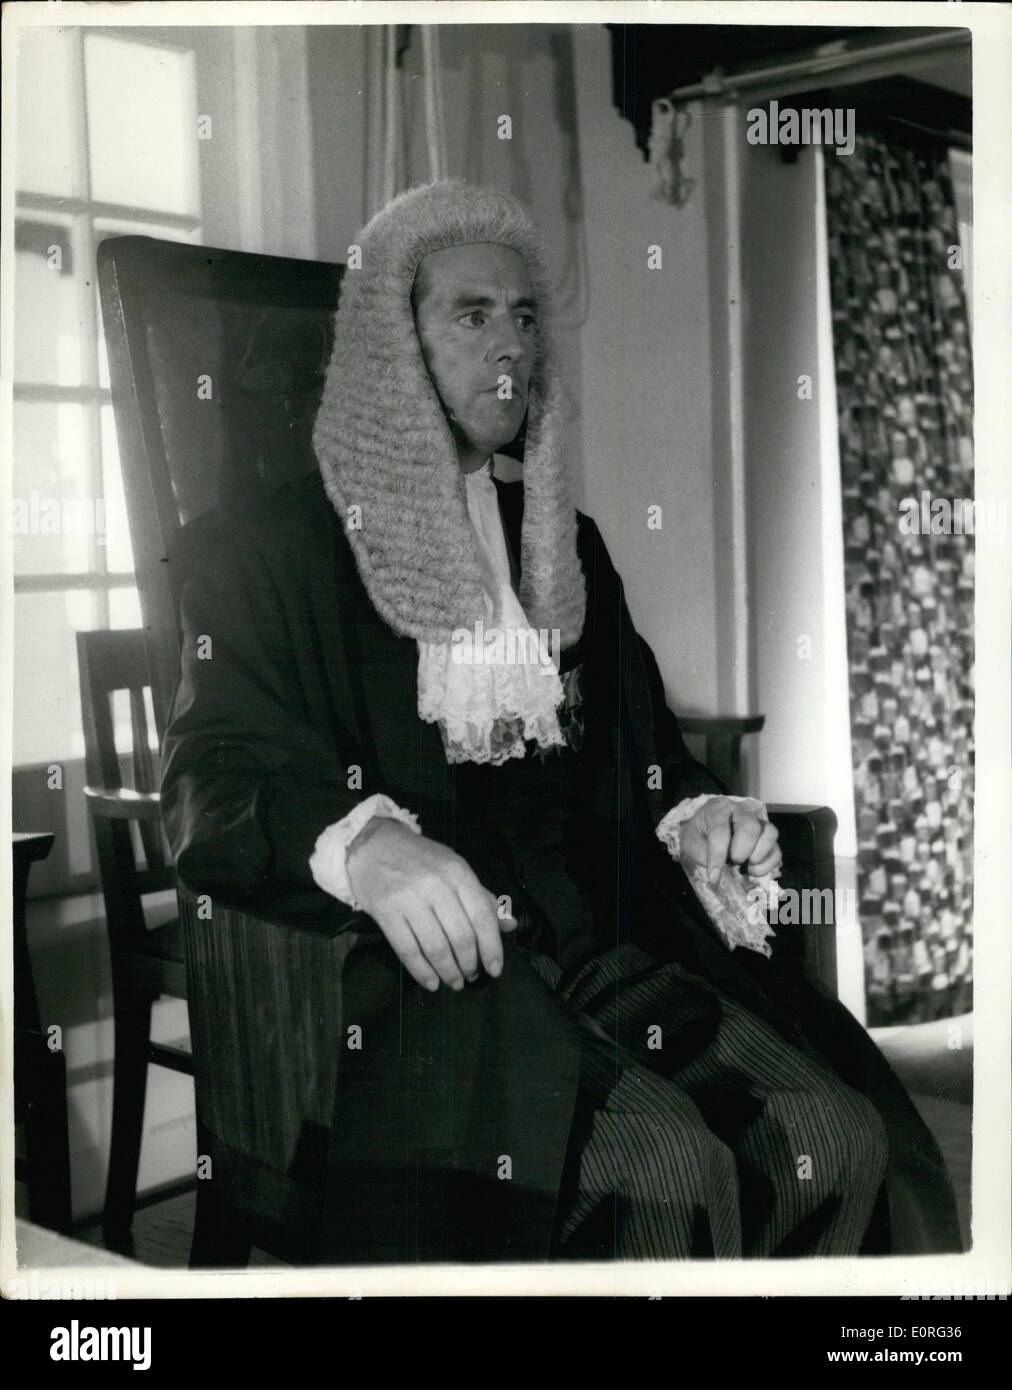 May 05, 1959 - During their tour of the Southern Cameroons by the Duke and Duchess of Gloucester, the first members of the Royal Family to visit to the House of Assembly. Photo Shows The Hon. E.H. Sainsbury, the Speaker of the House of Assembly, who presented the Loyal Address to the Duke after it was read by the Premier in the House of Assembly. Stock Photo